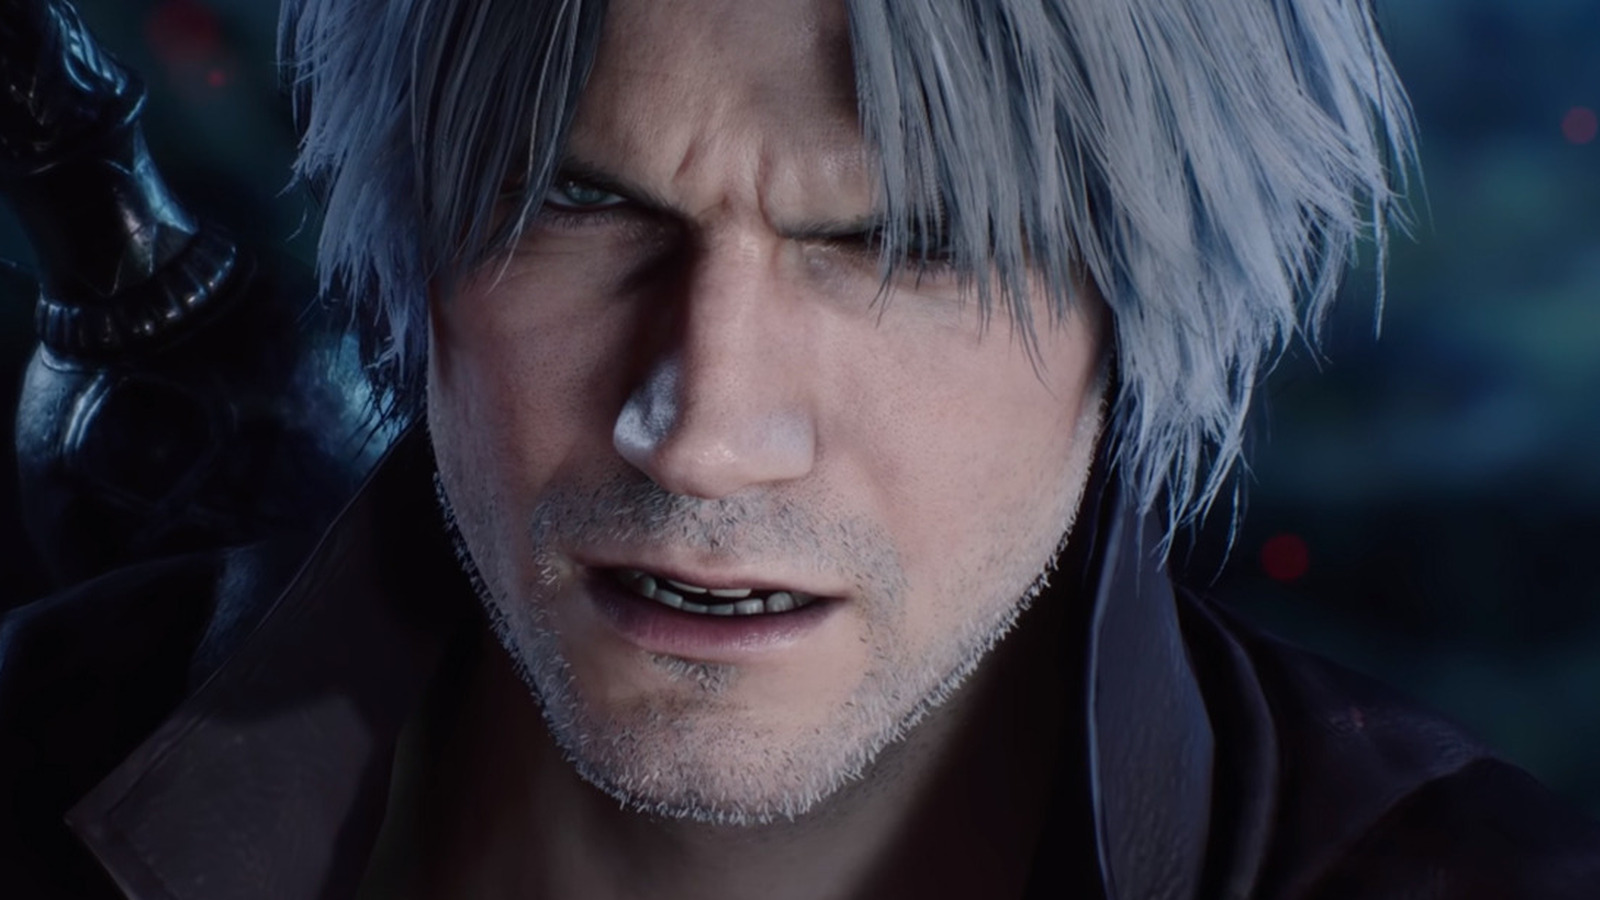 How Long Does It Take To Beat Devil May Cry 5?